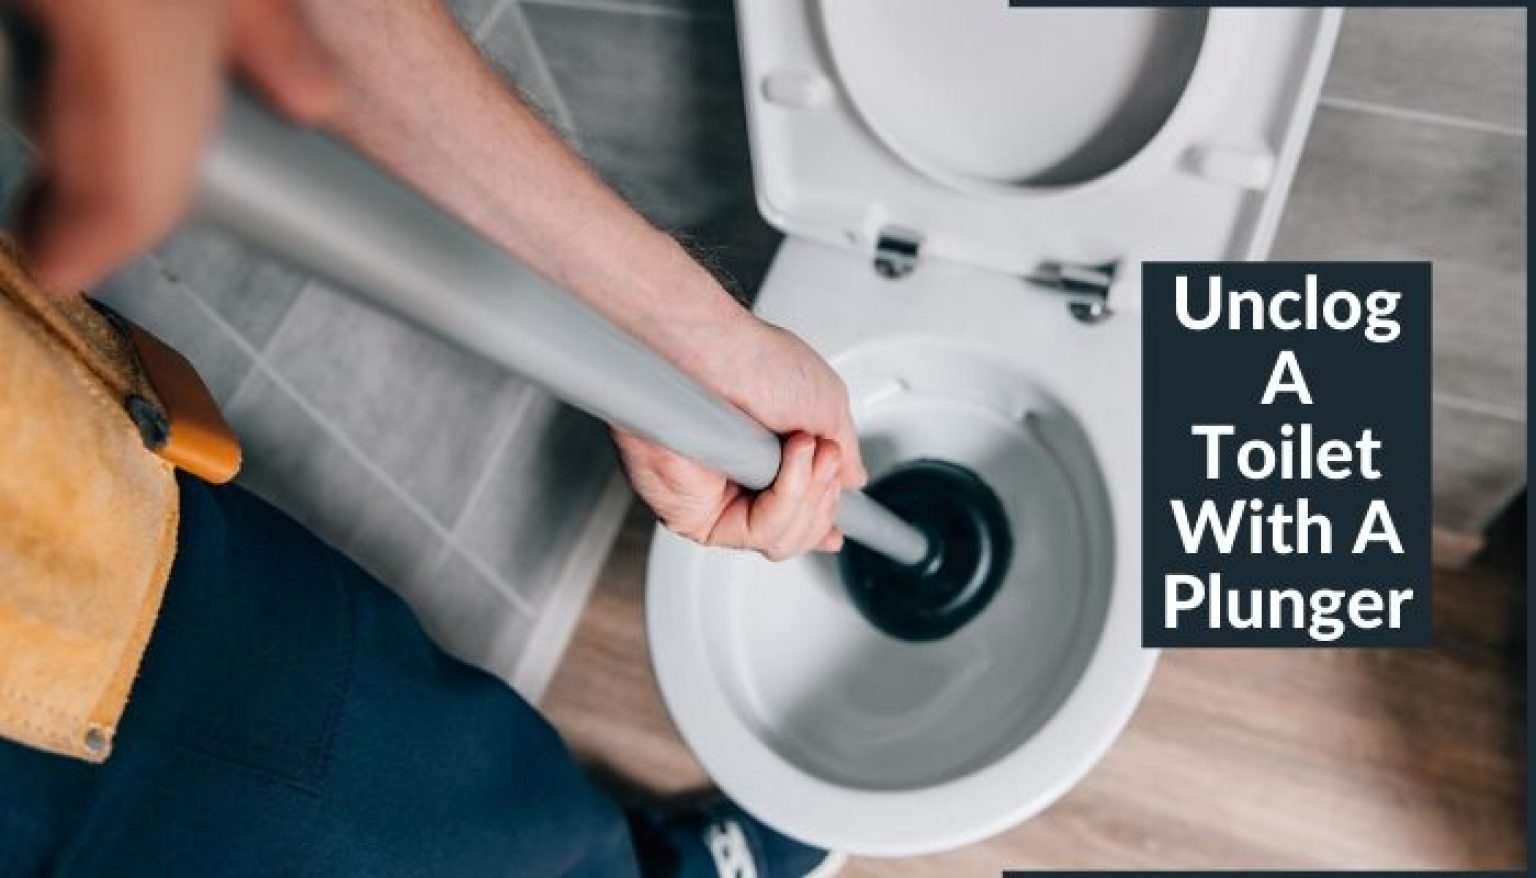 Unclog A Toilet With A Plunger 1536x878 